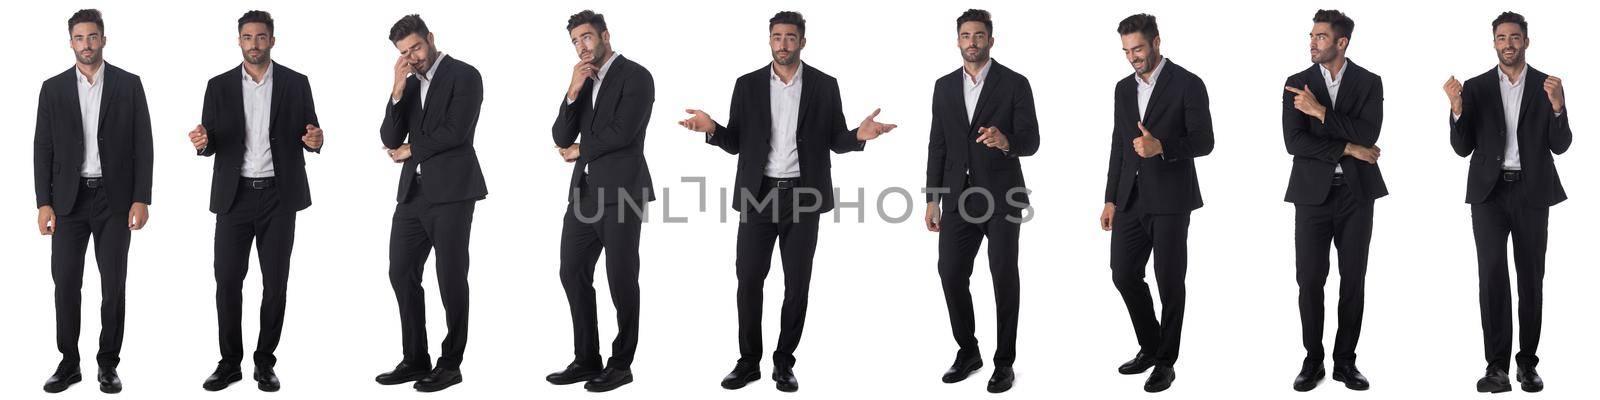 Set of young business man portraits doing different gestures isolated on white background